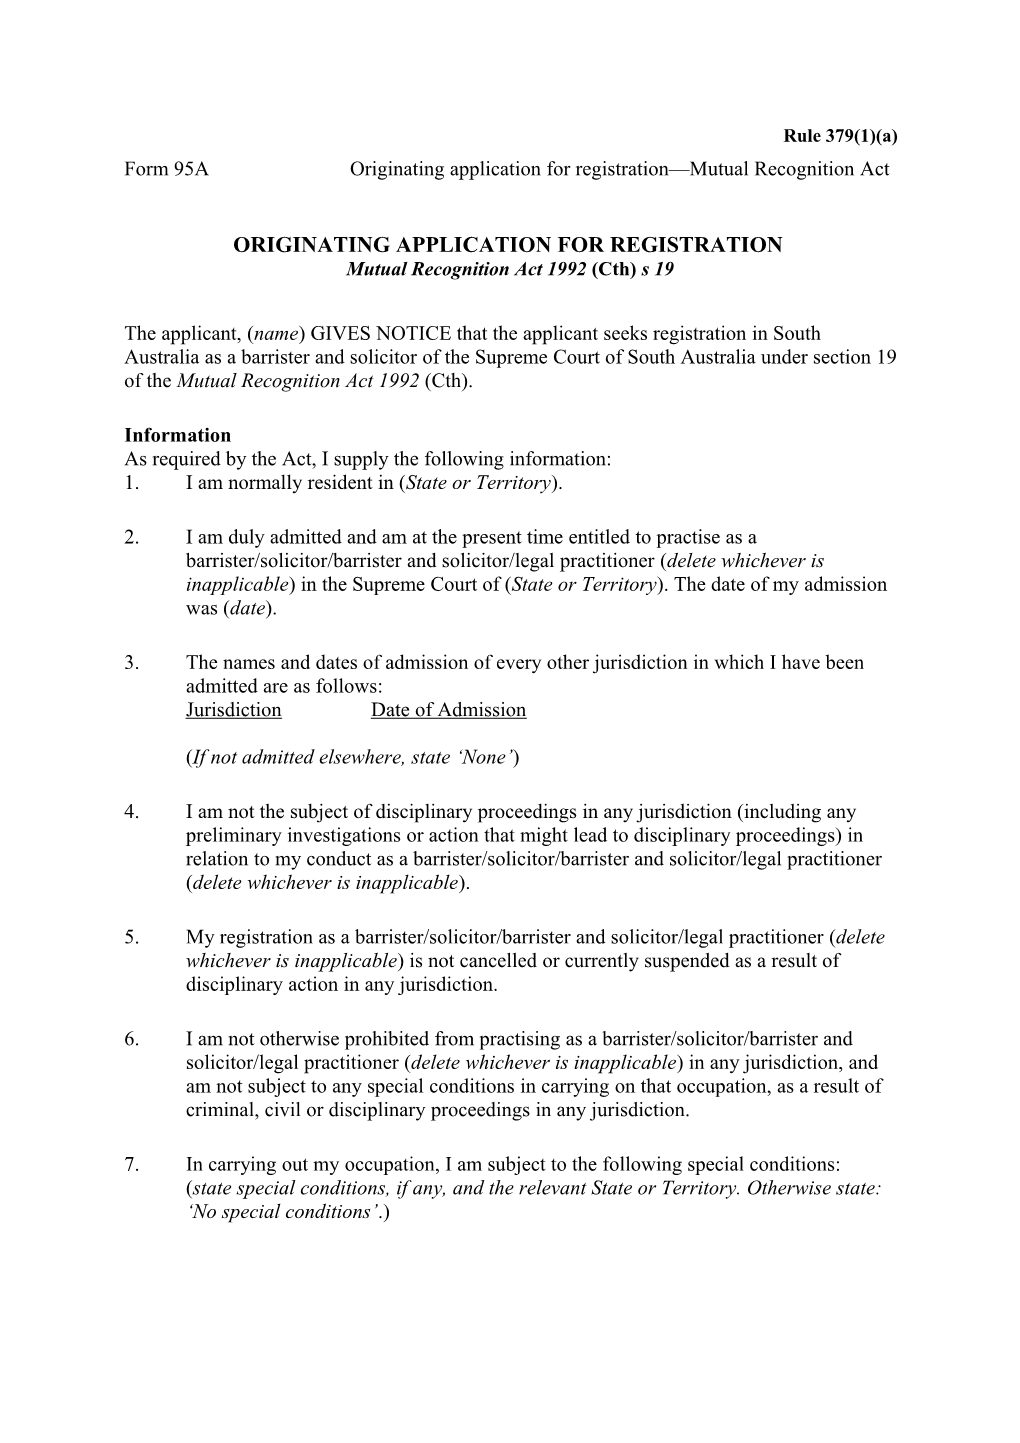 Form 95A - Originating Application for Registration - Mutual Recognition Act